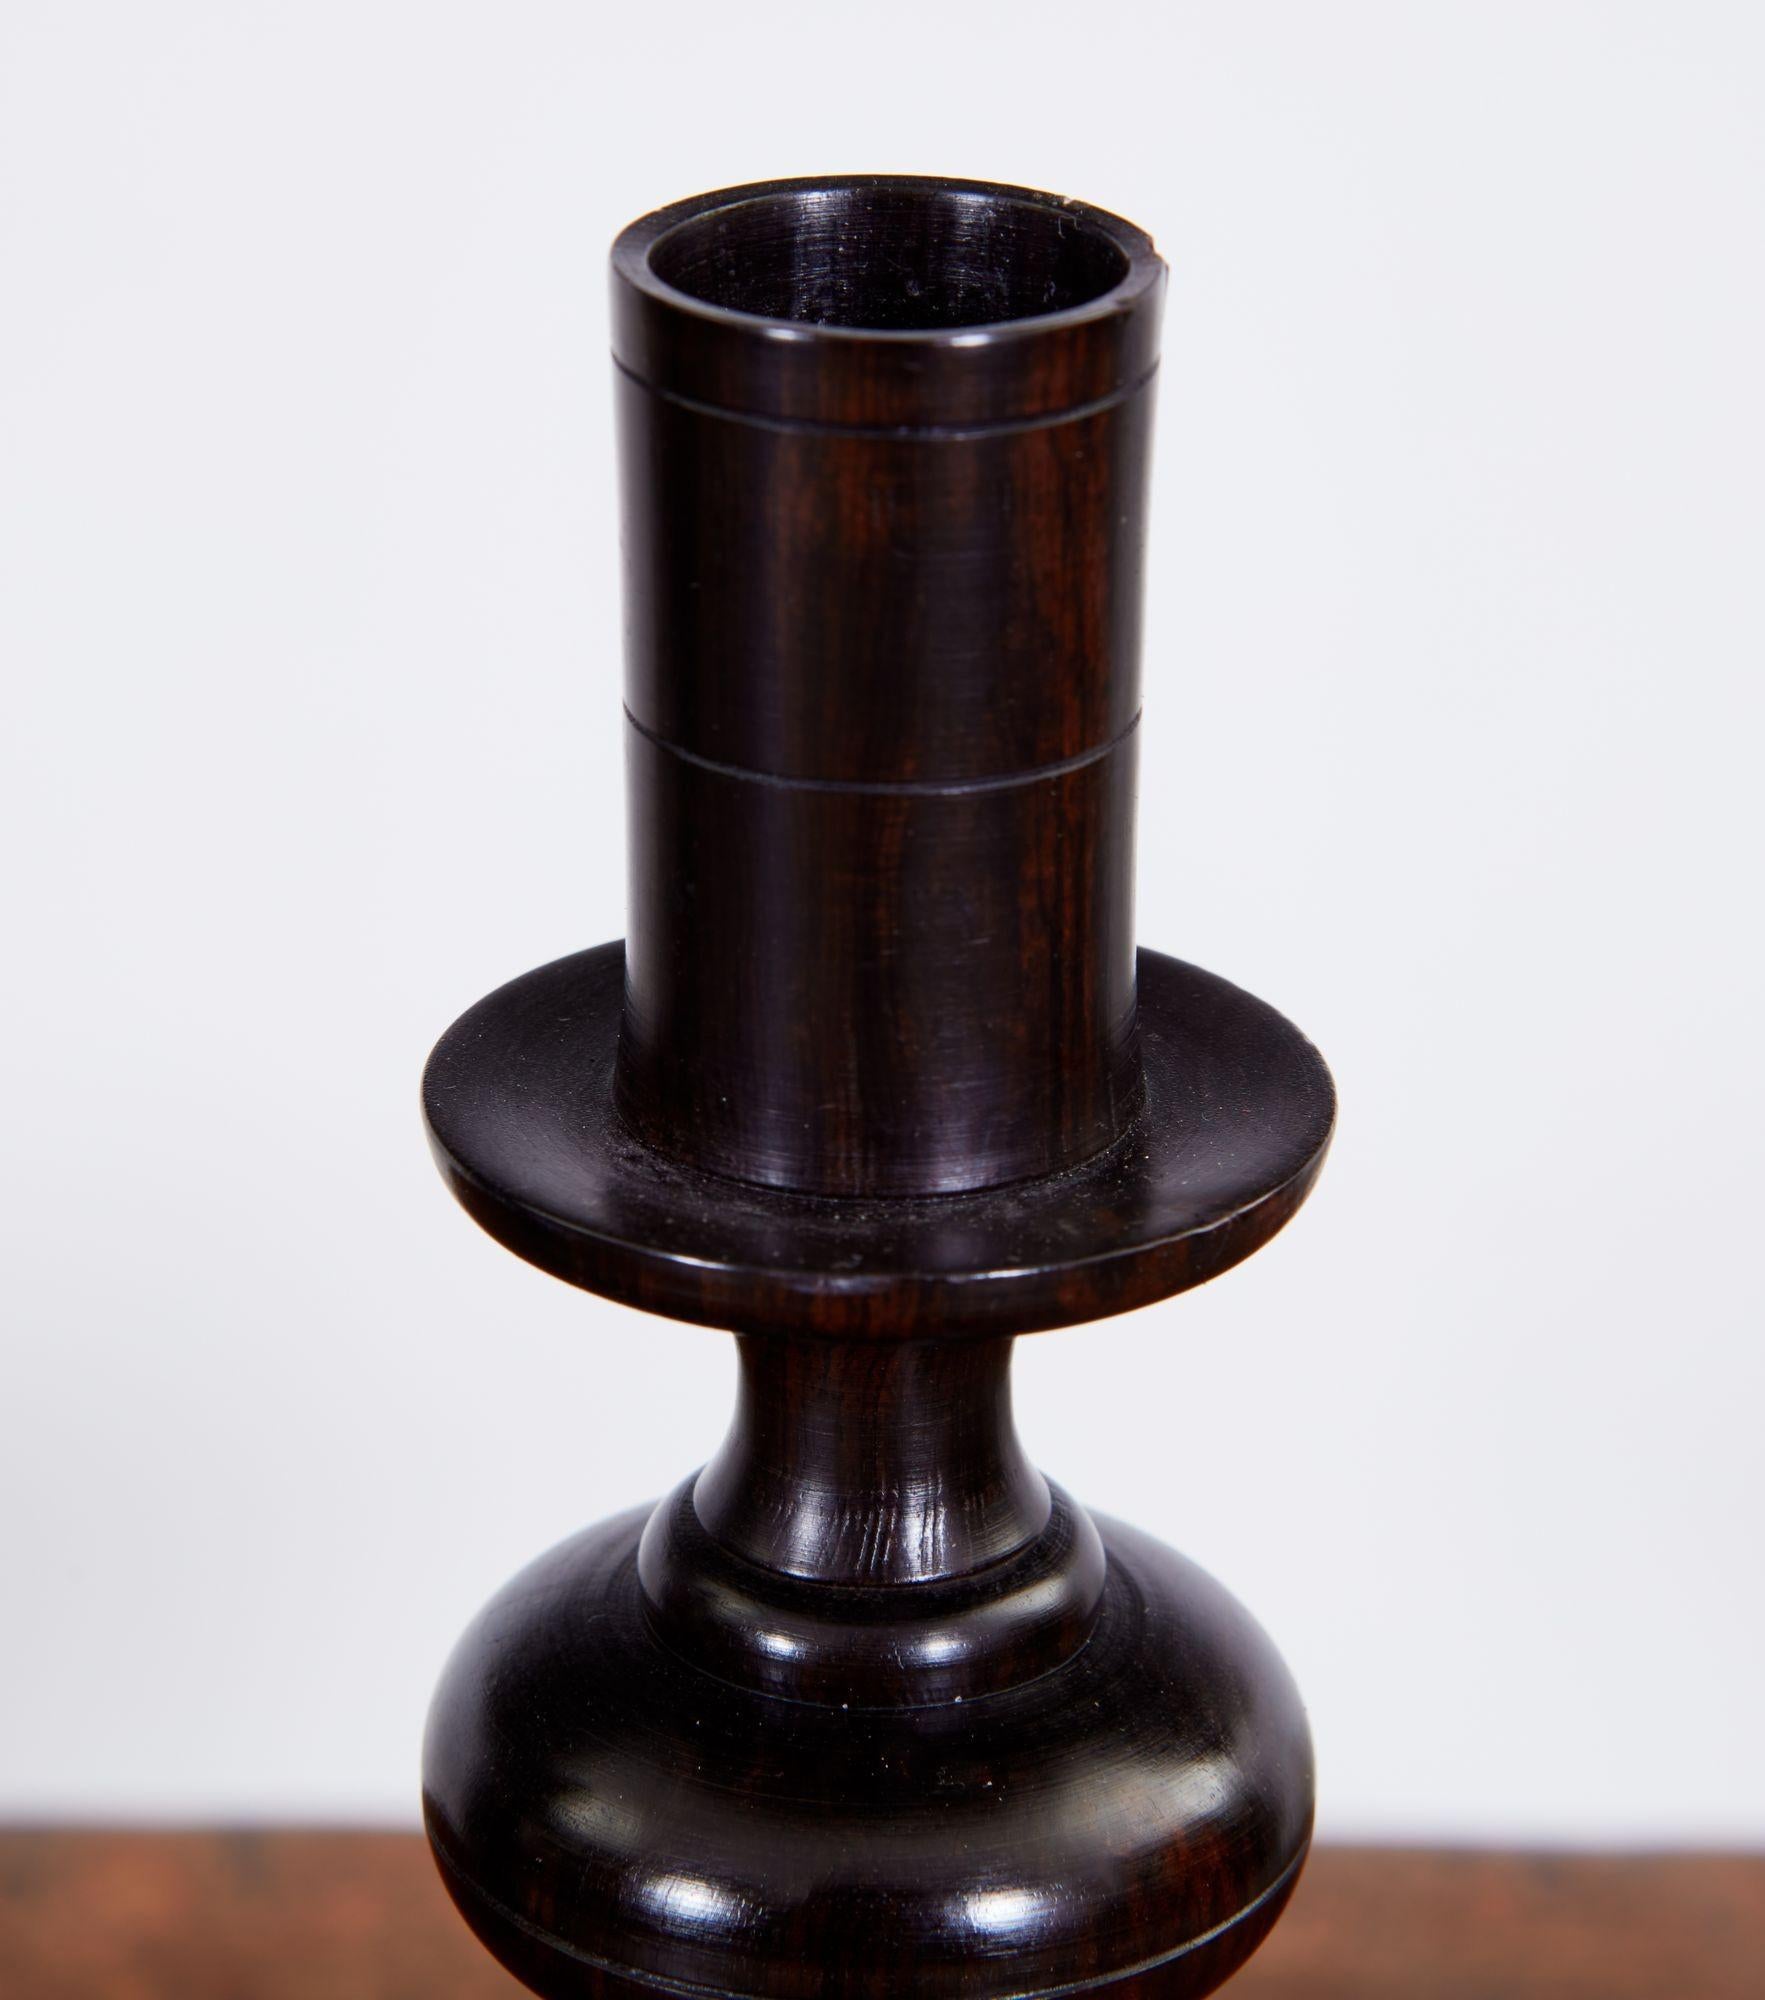 Fine pair of solid ebony lathe-turned candlesticks with ribbed shafts and standing on turned plinth bases.
 
Treen